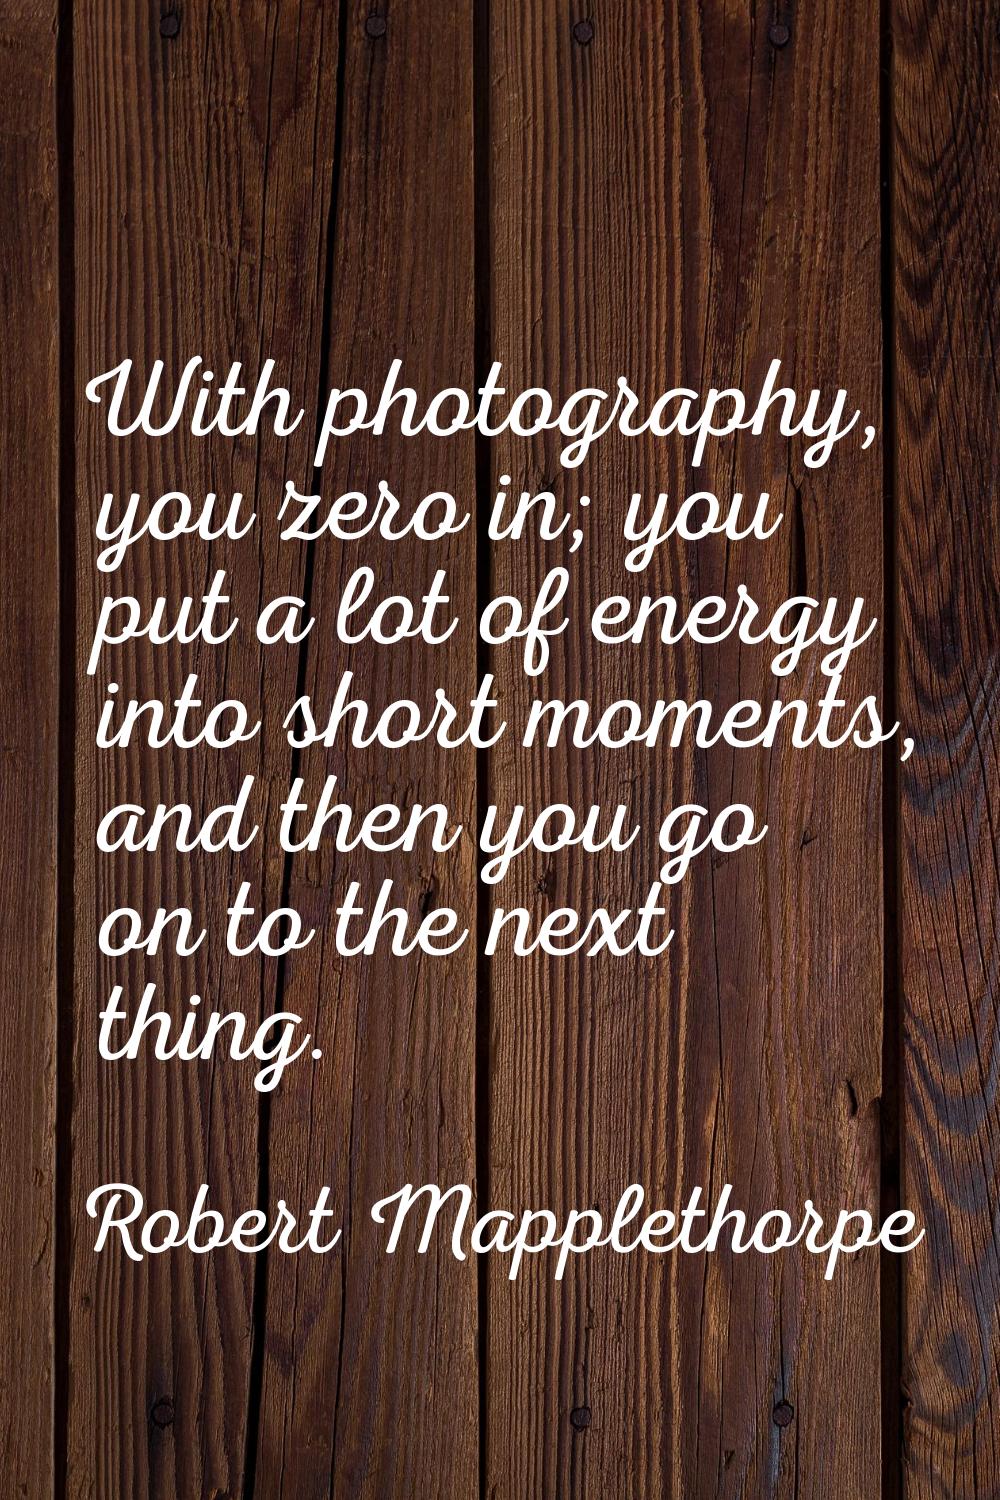 With photography, you zero in; you put a lot of energy into short moments, and then you go on to th